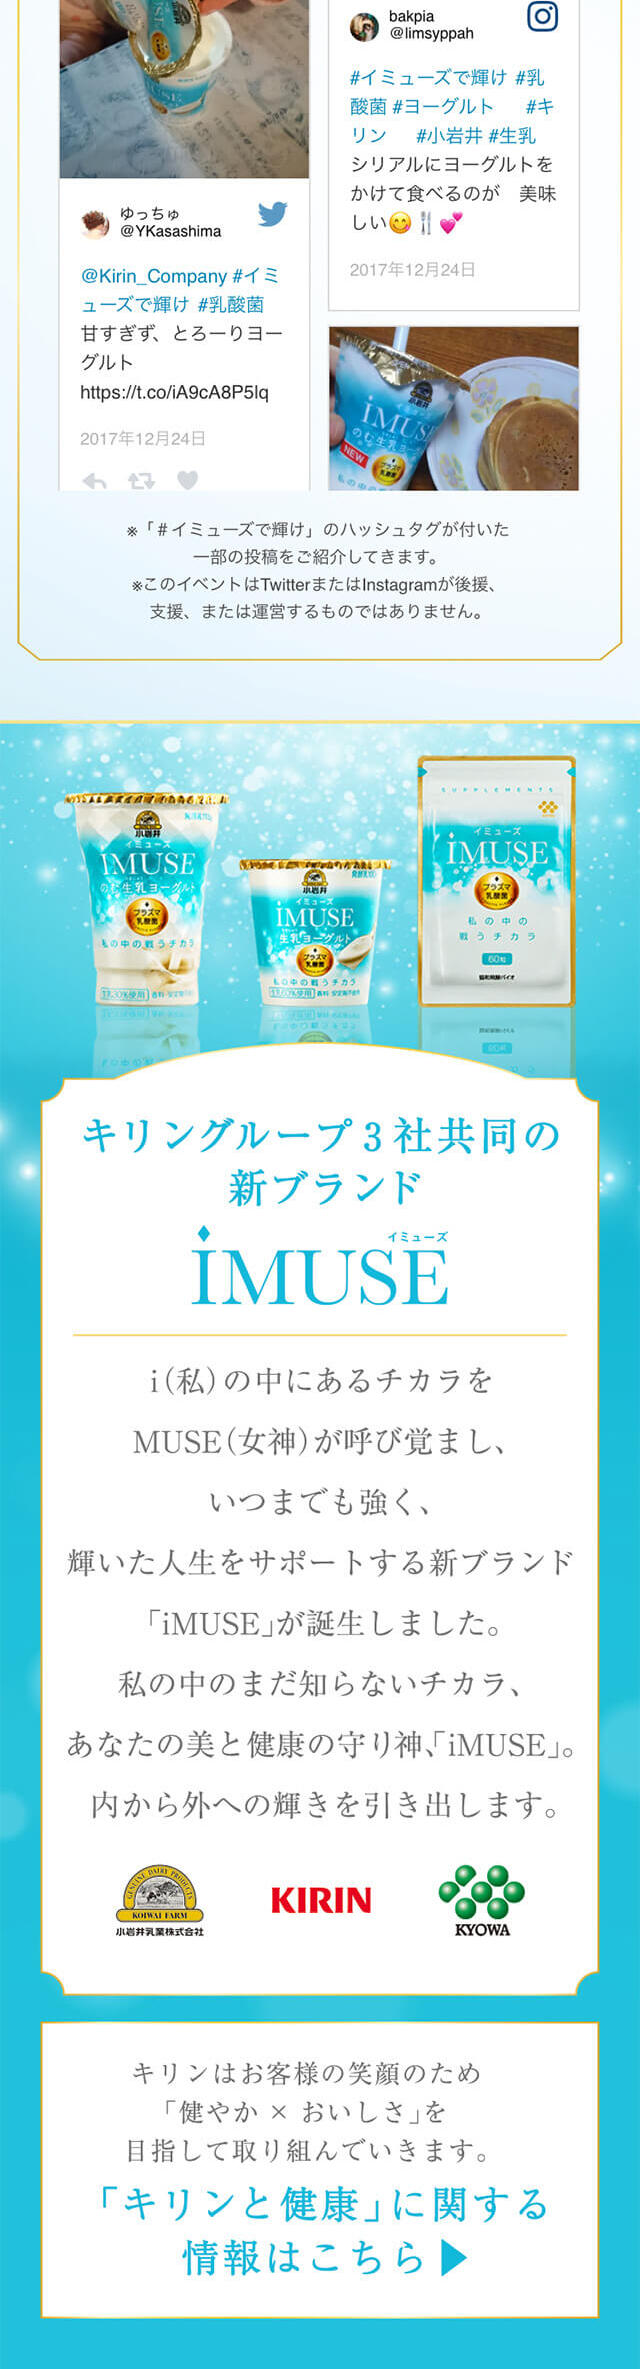 iMUSE_sp_2